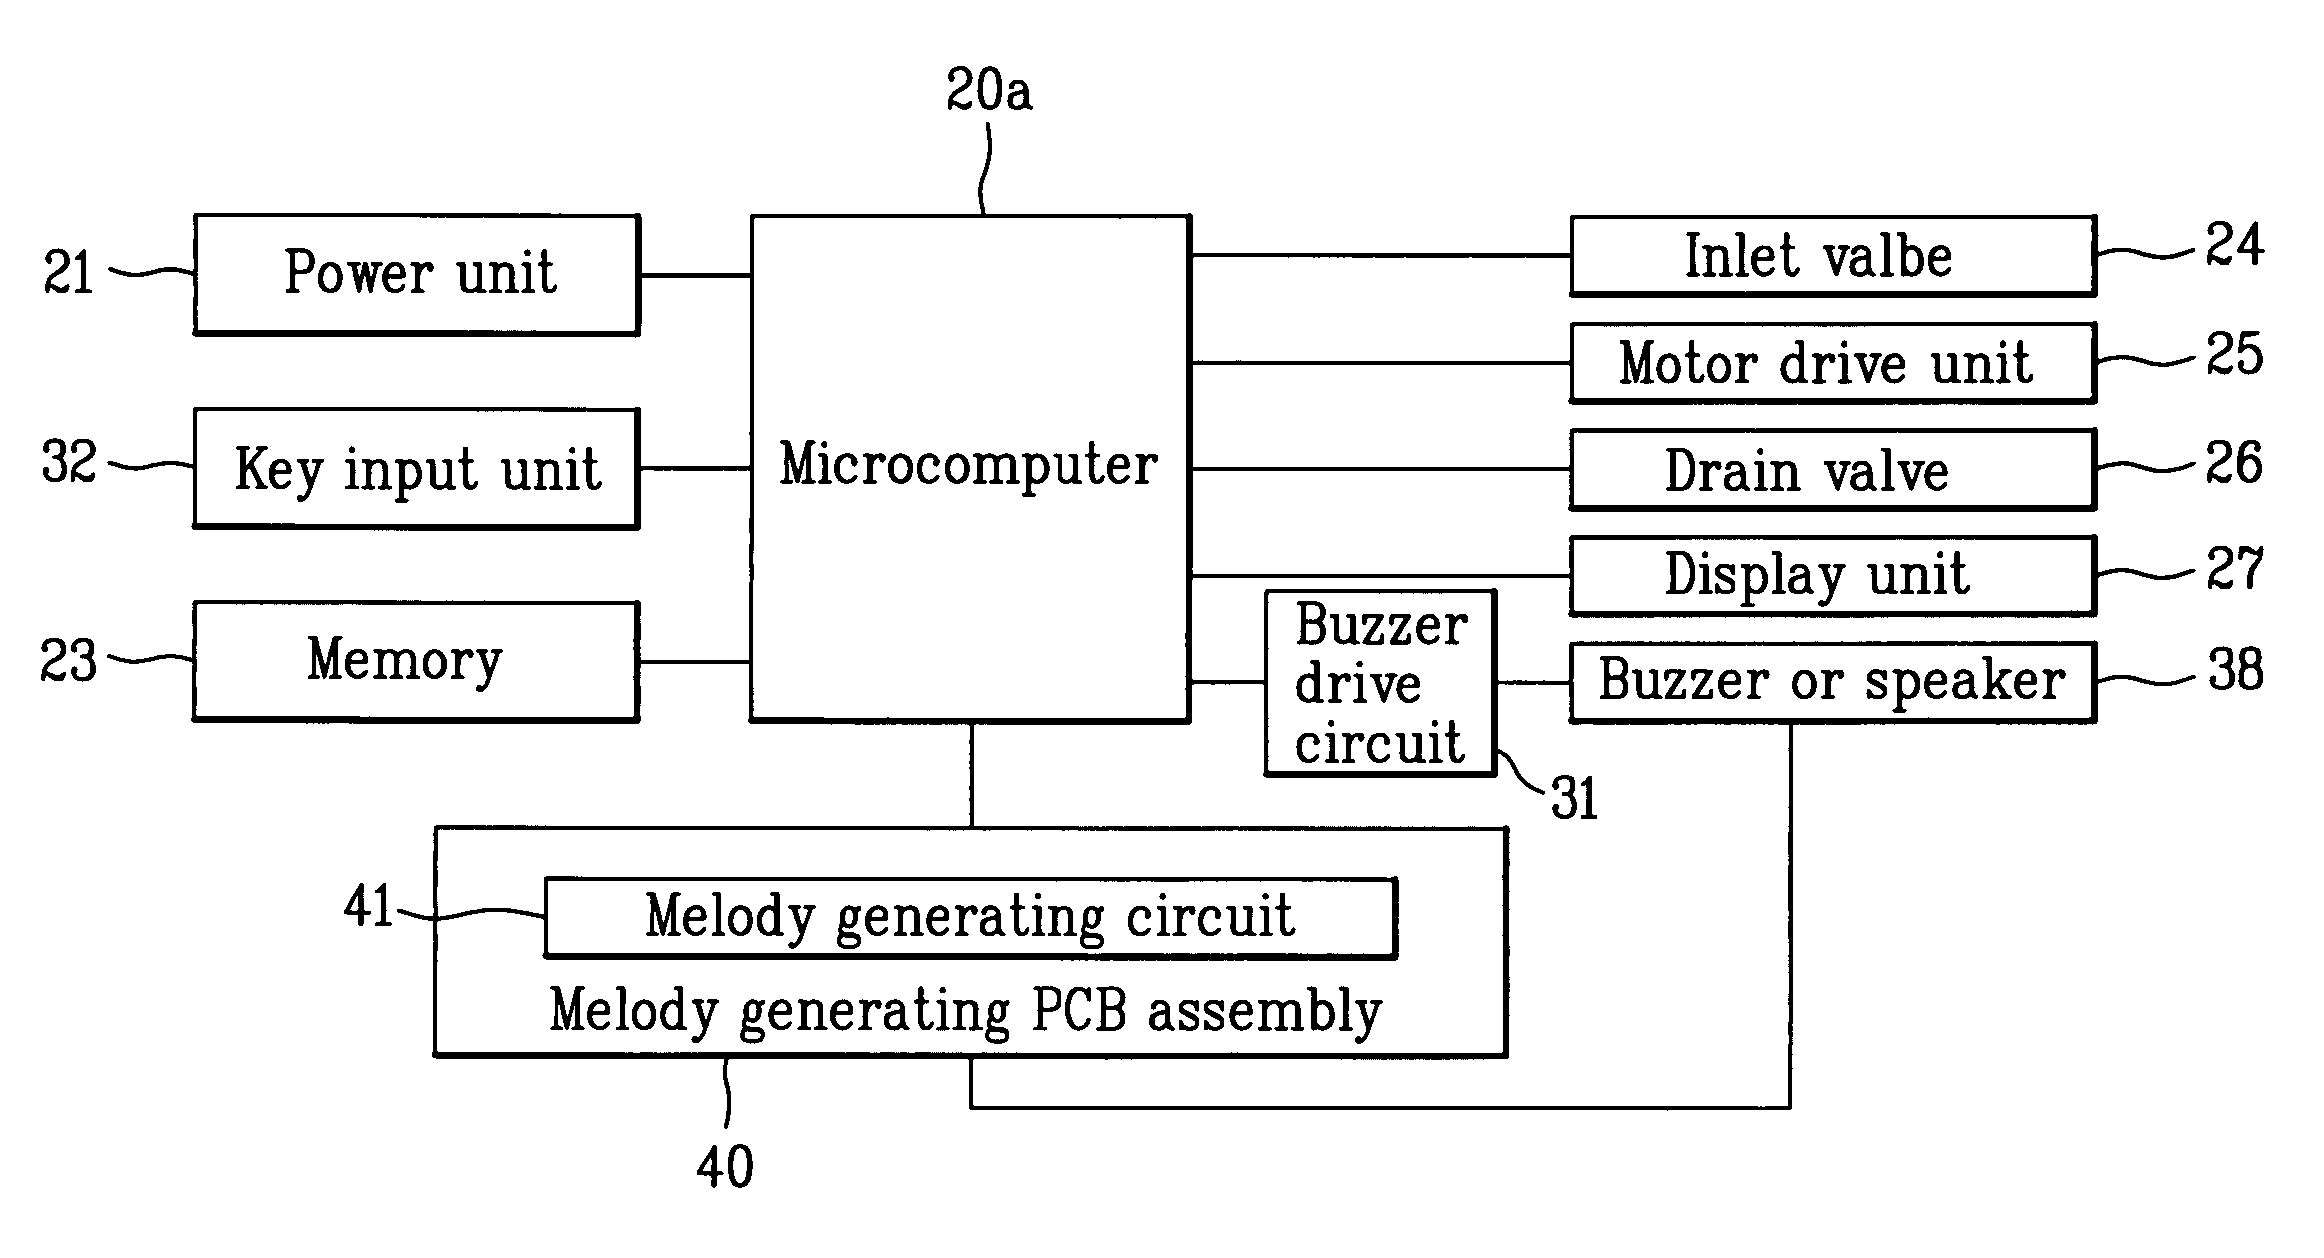 Washing machine with melody generating assembly